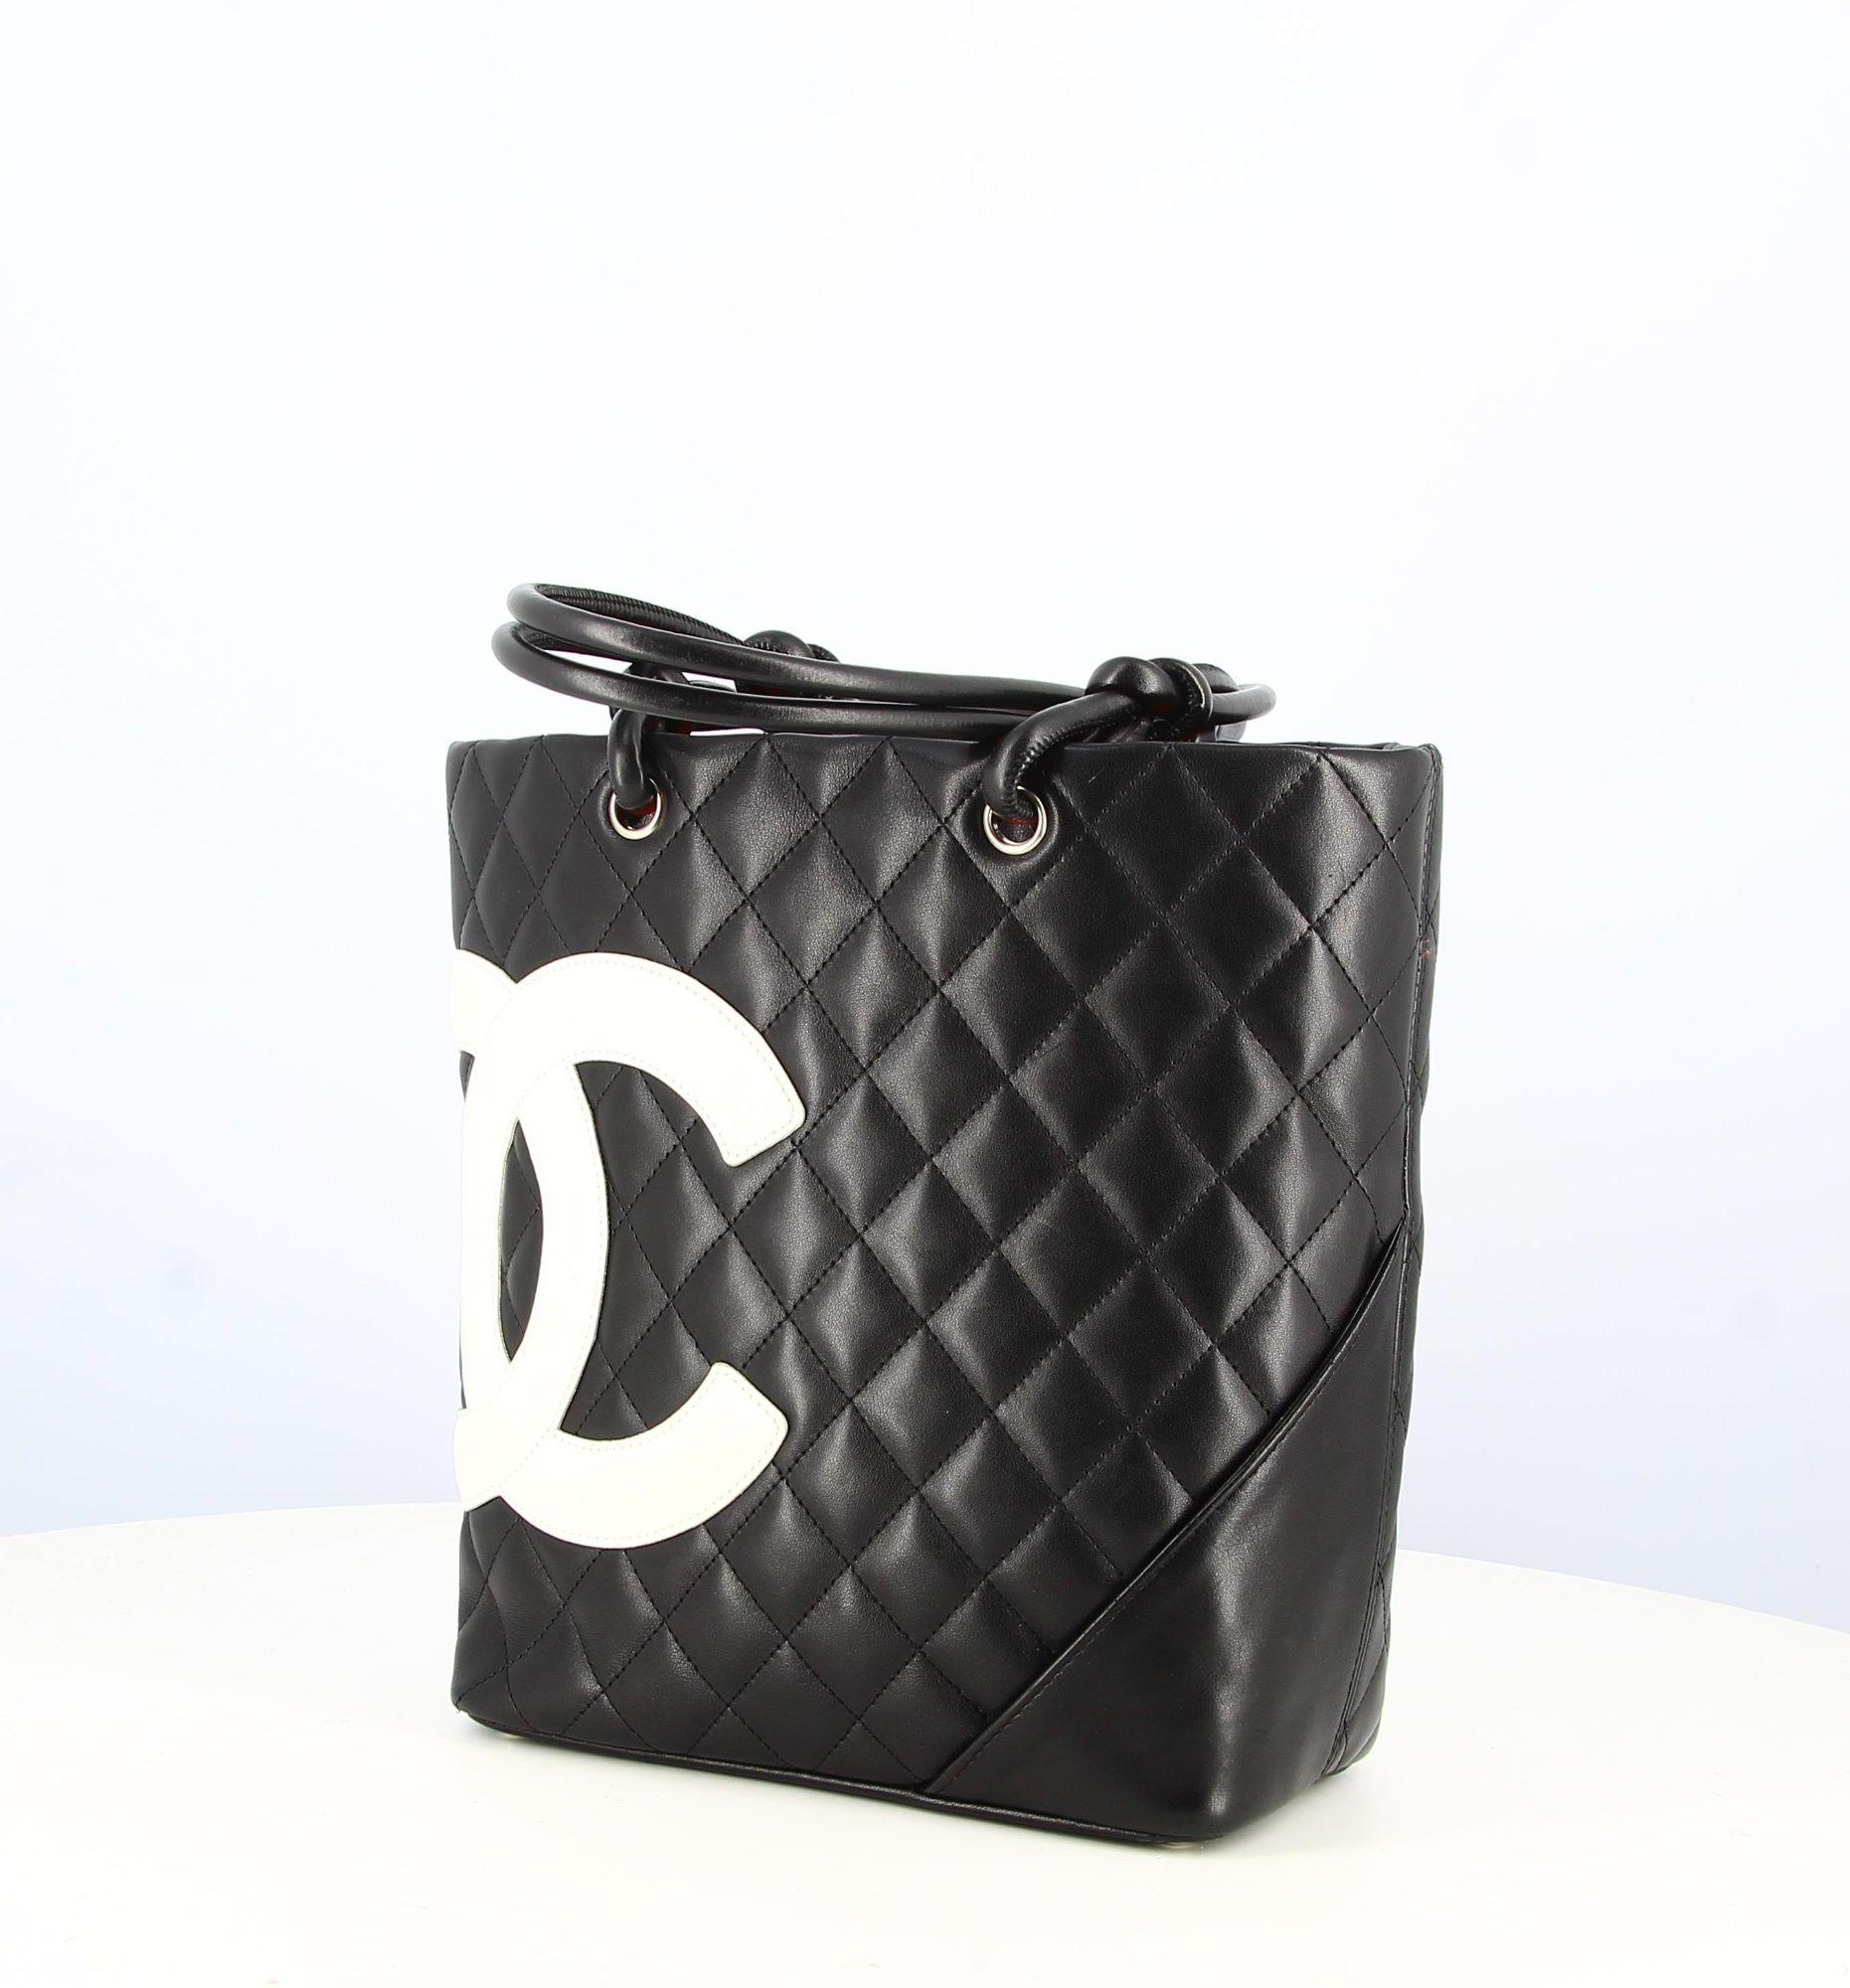 2004-2005 Chanel Cambon Black Leather Bag
- Good condition with slight traces of wear appeared with time.
- Black quilted handbag, double C logo in white on the side, double short black leather straps, small pocket inside
- Pink fabric interior,